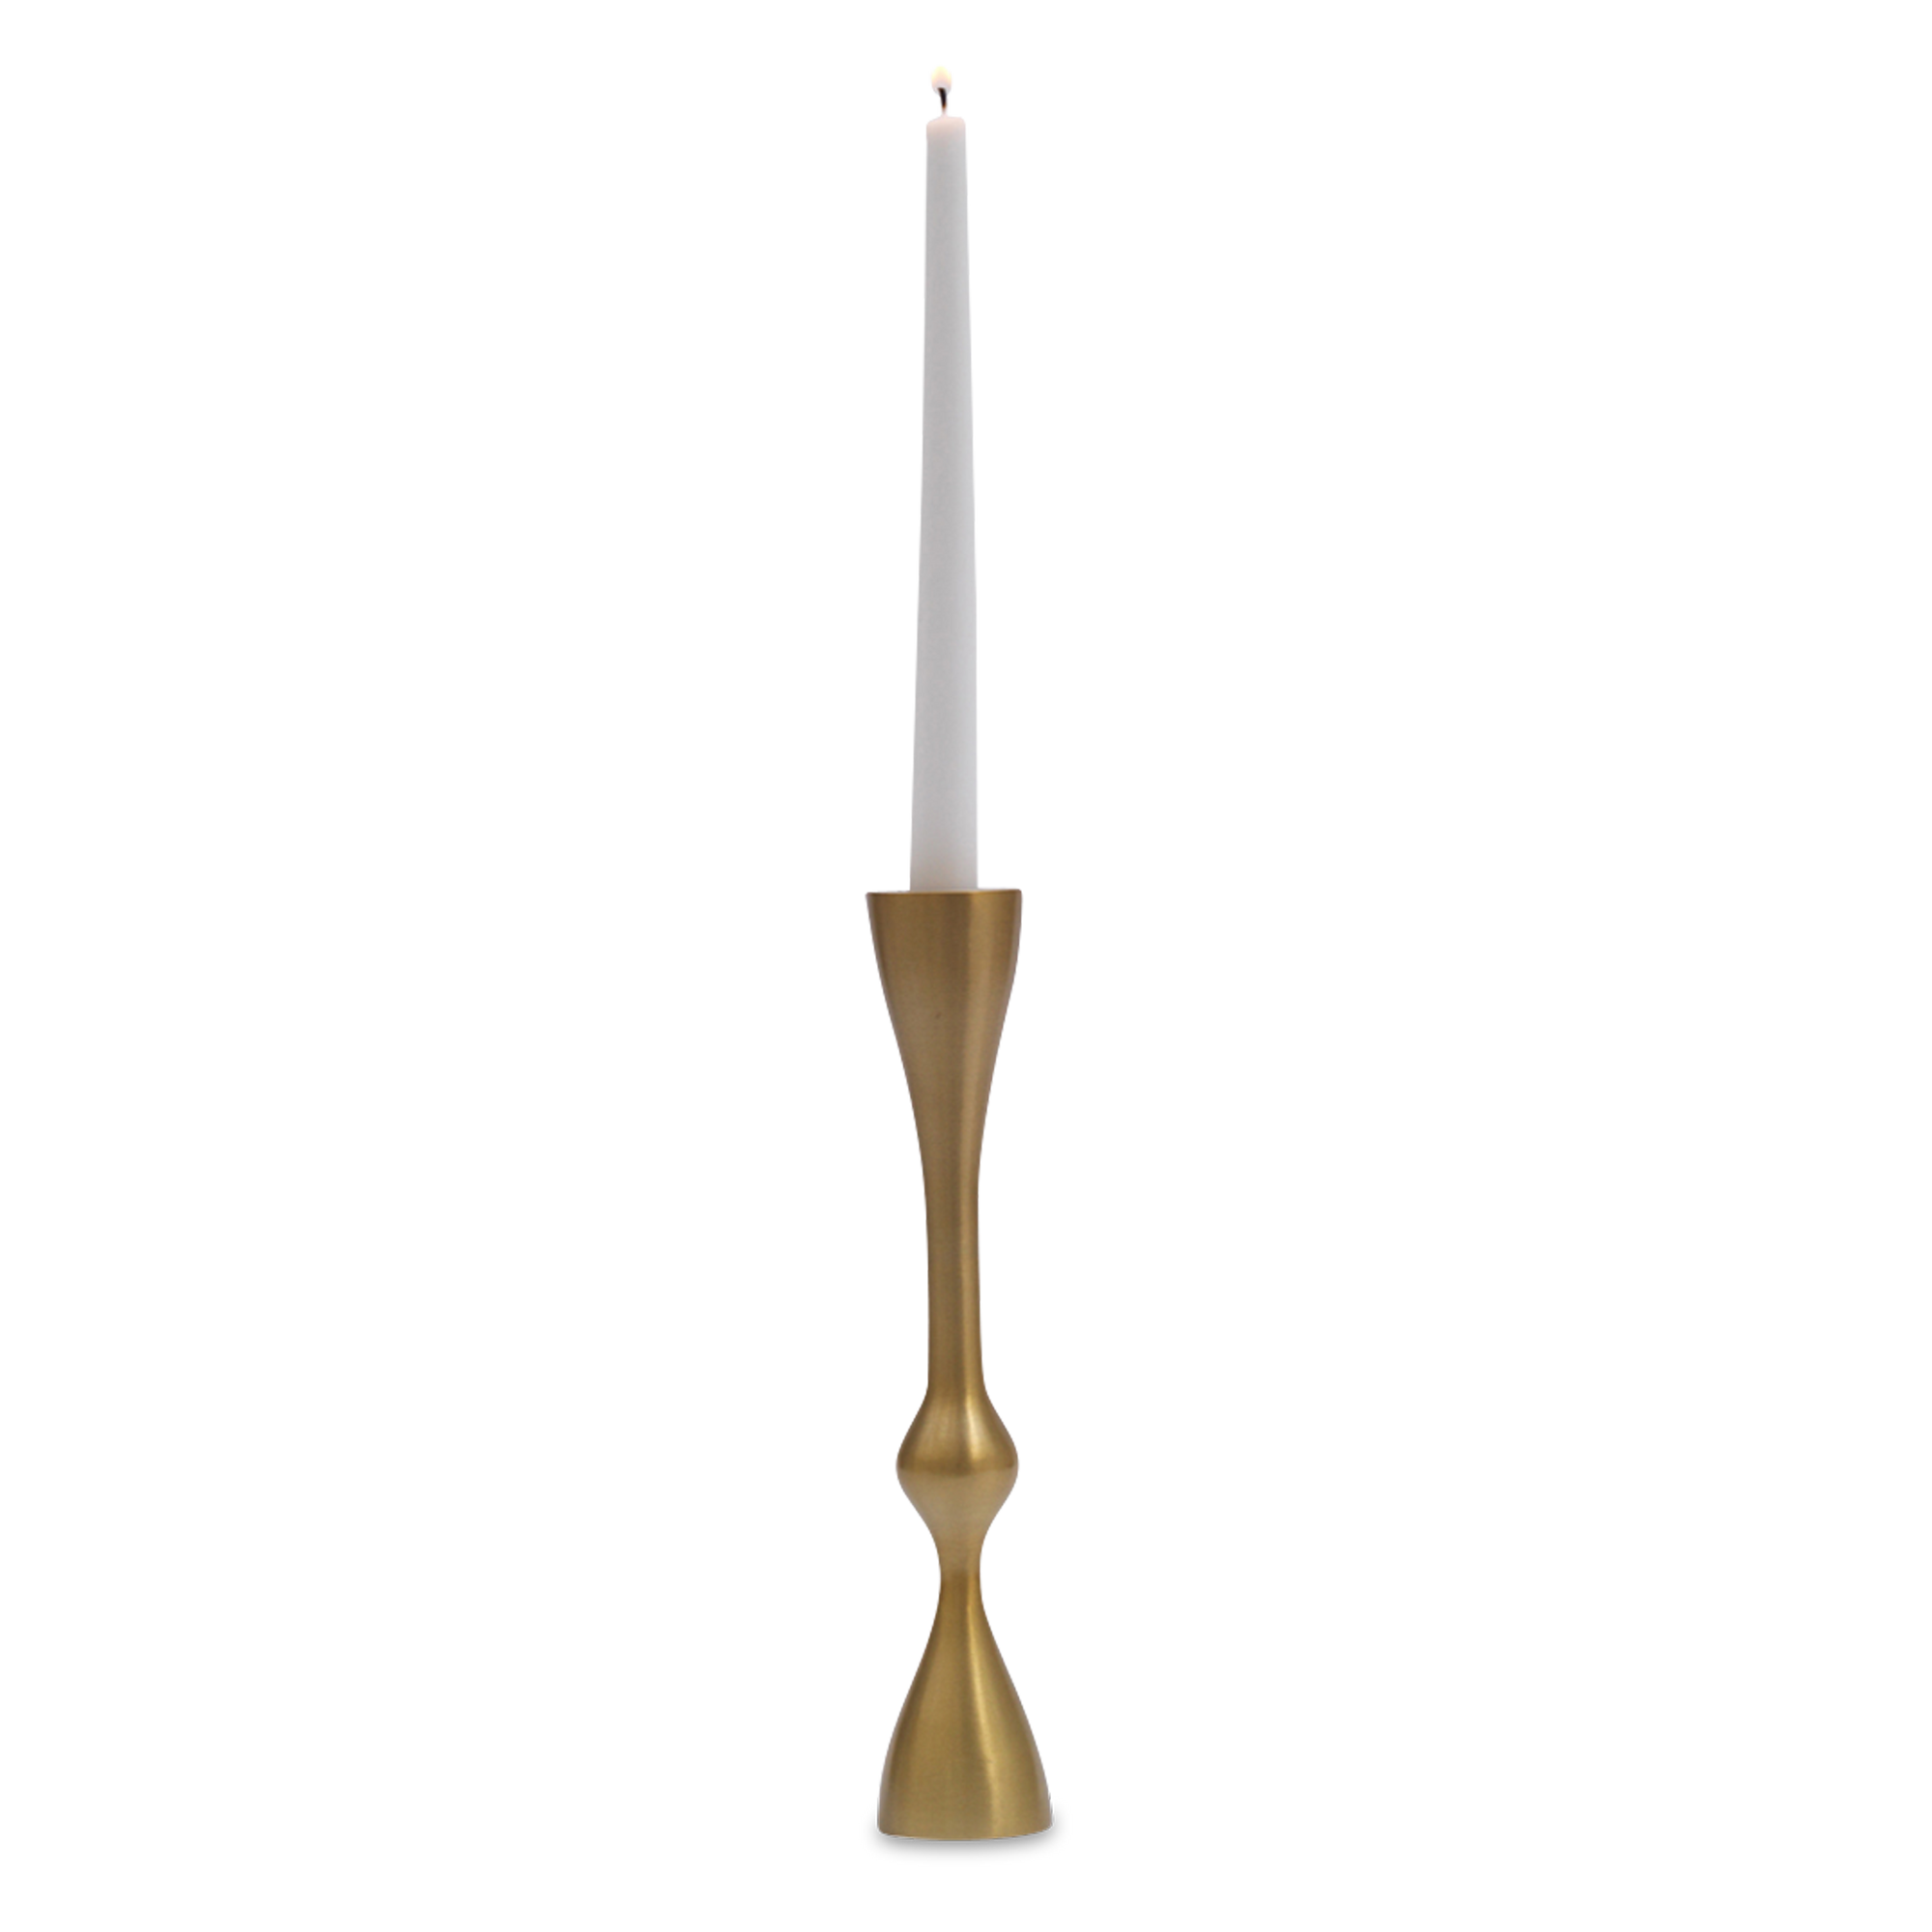 The Curved Candleholder features an elegant matte brass finish with a vintage modern look.